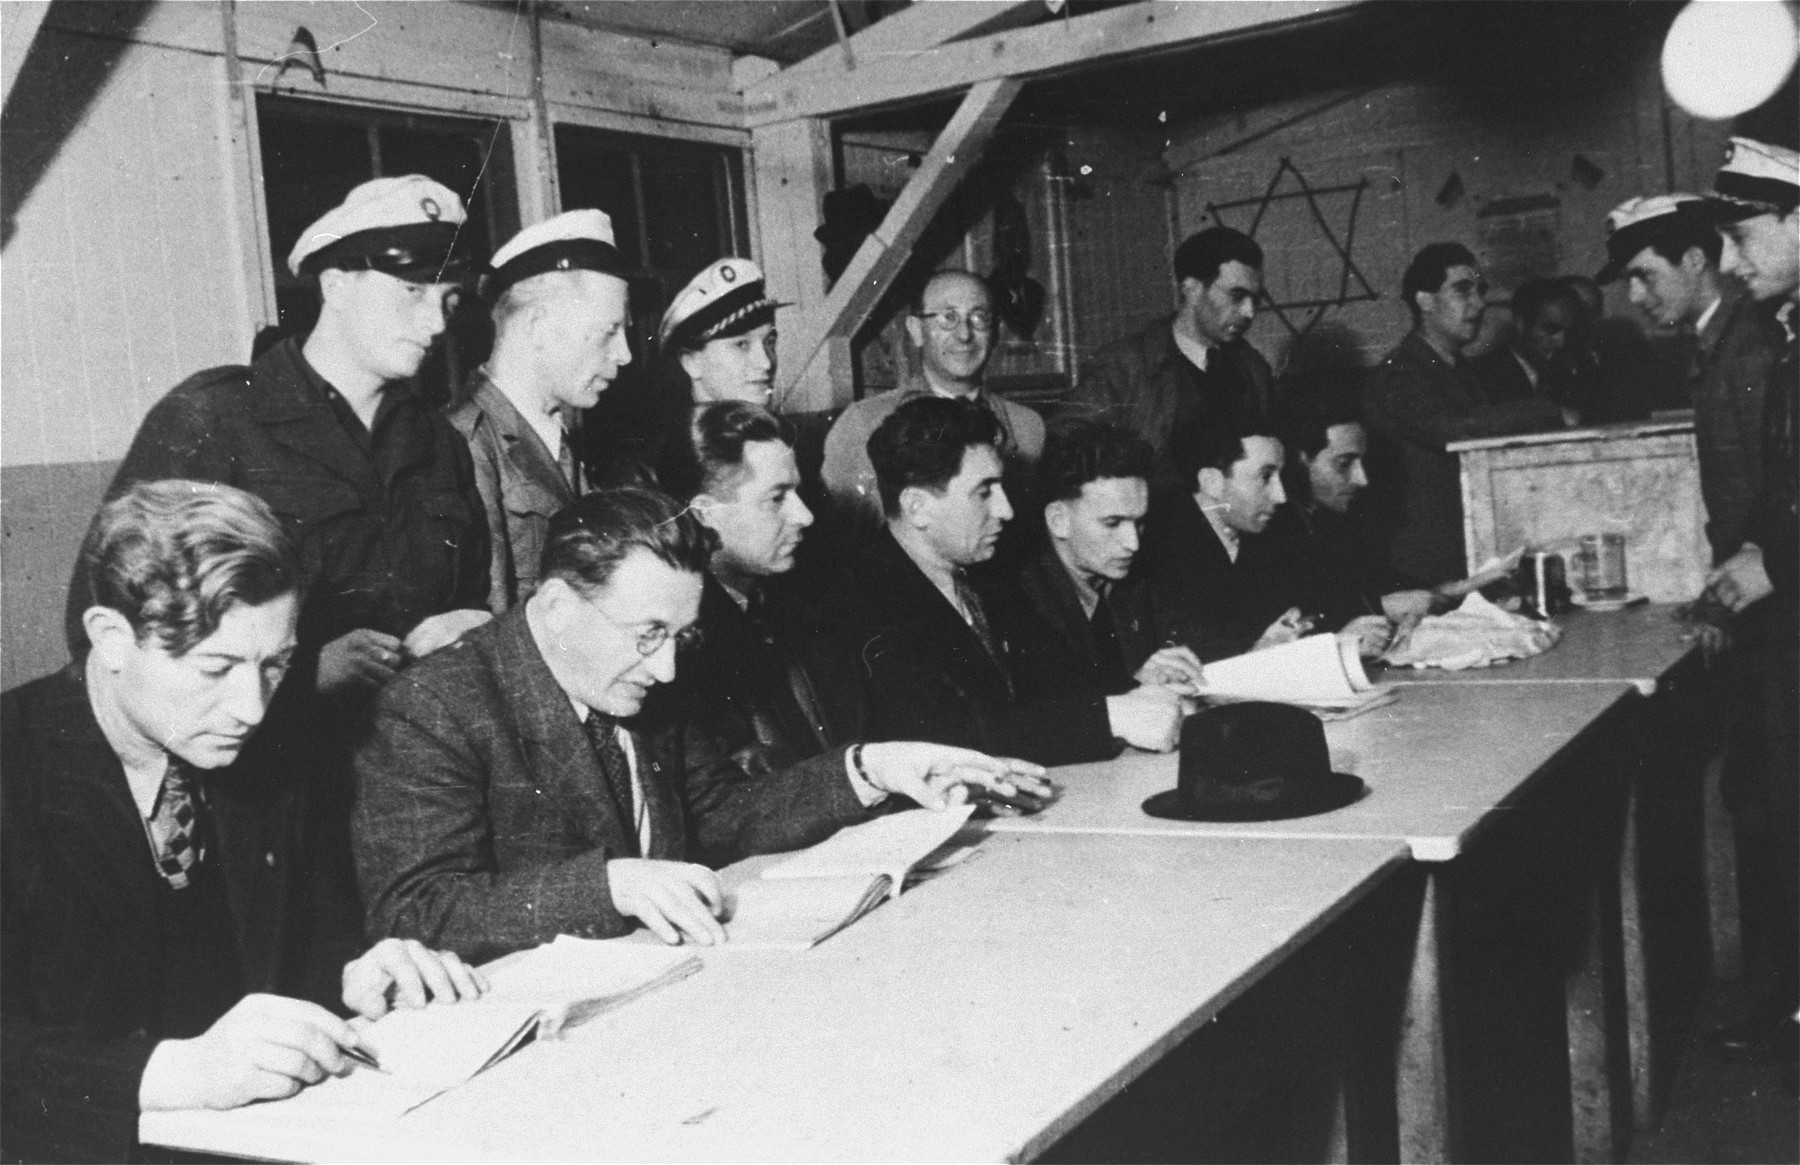 Jewish police supervise the work of the electing committee during elections in the Zeilsheim displaced persons' camp.